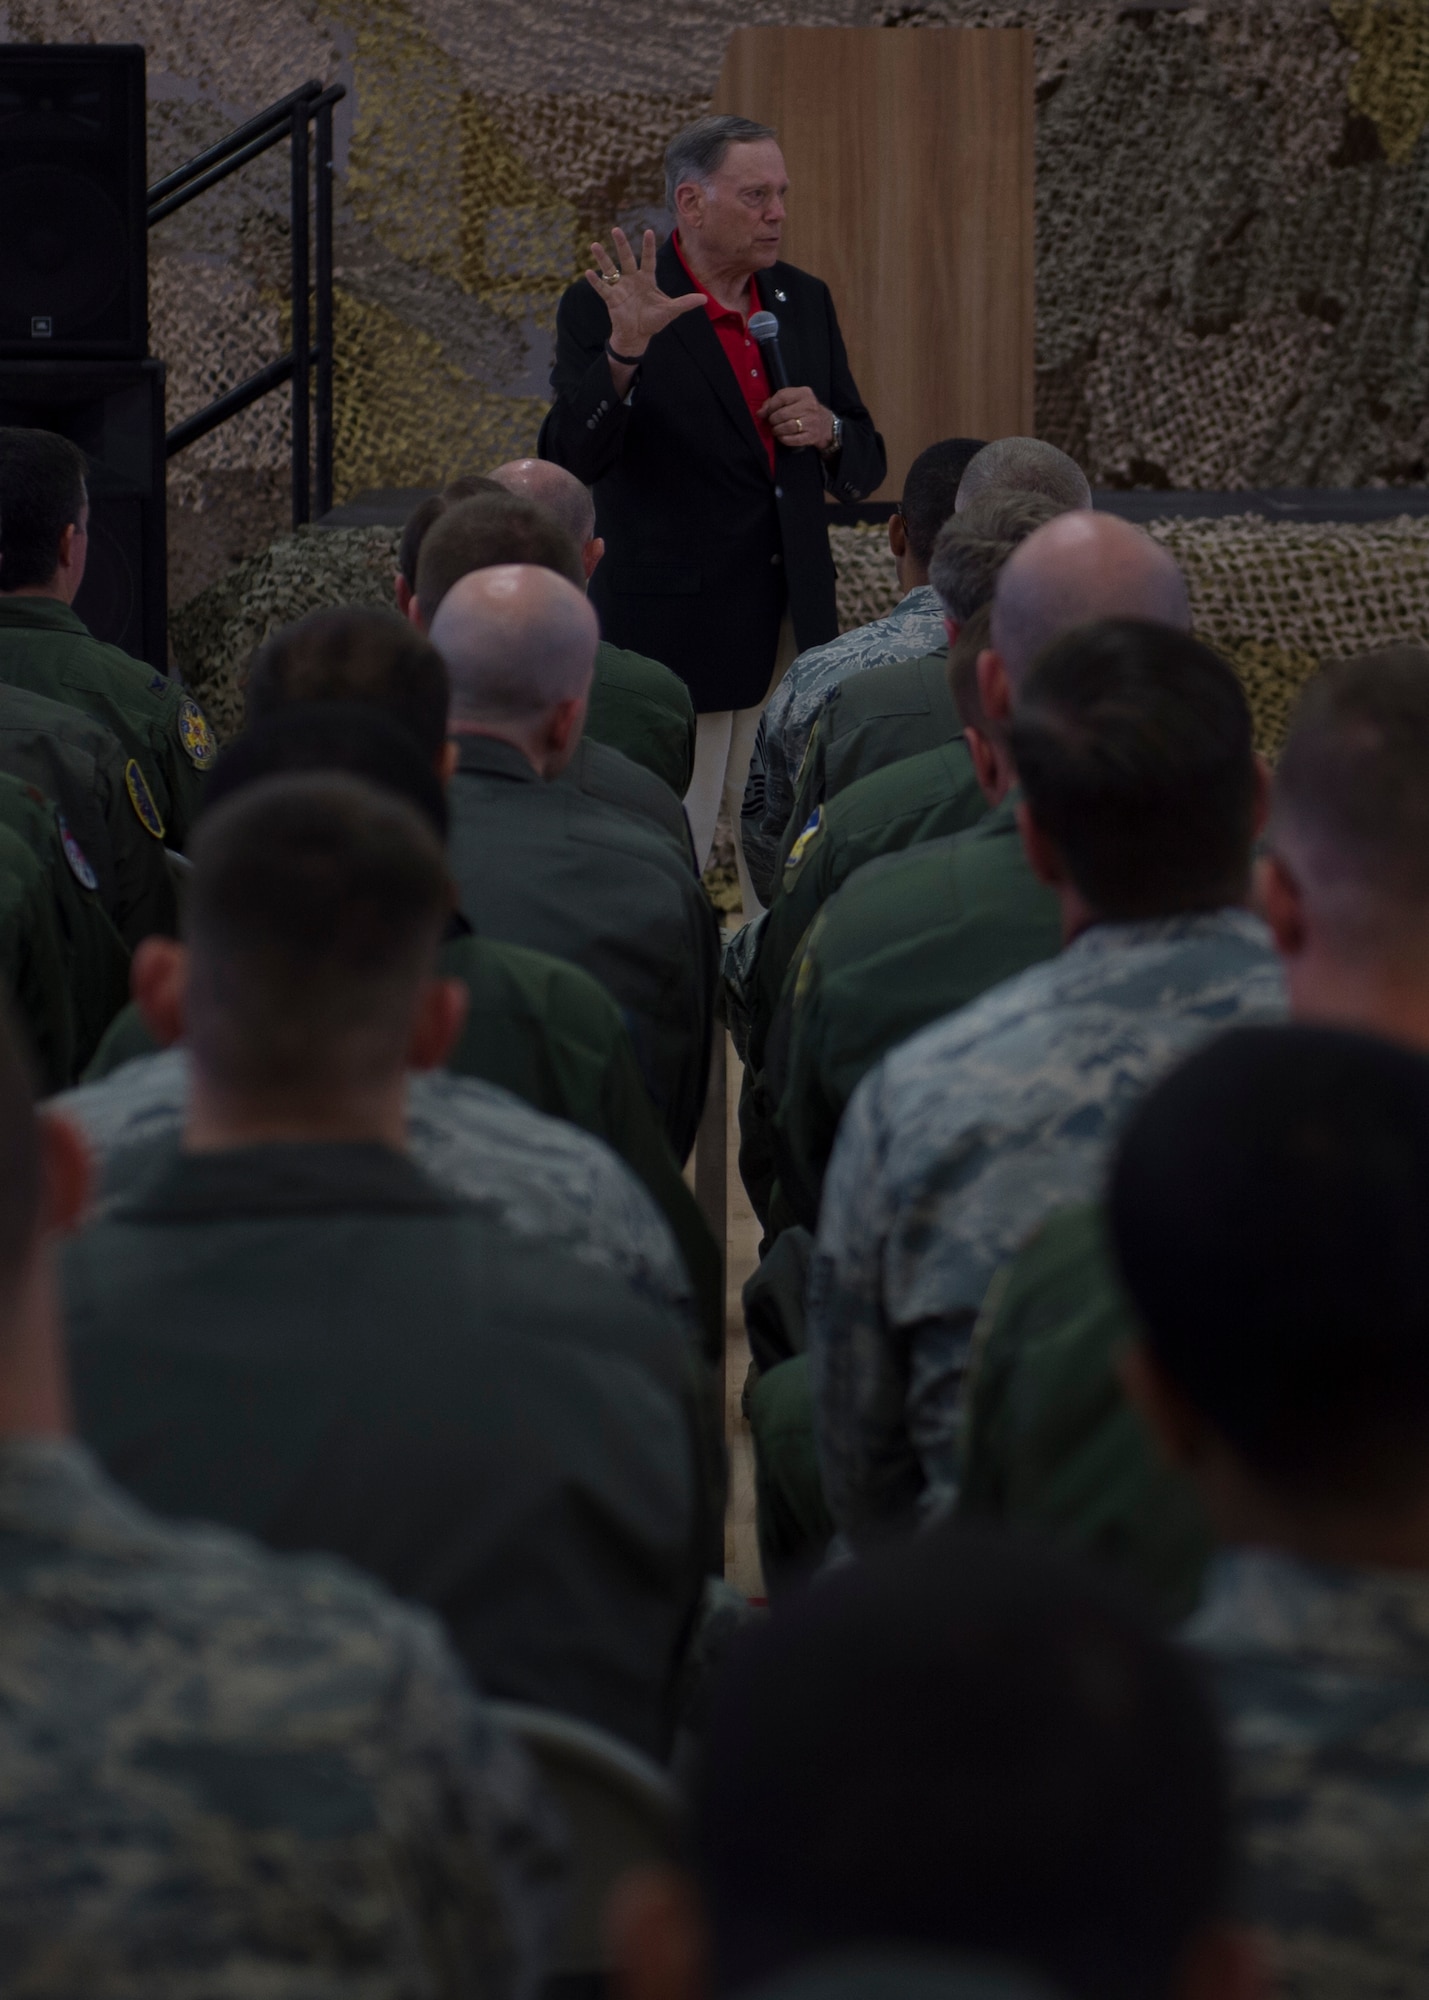 Ret. Gen. John Jumper, former U.S. Air Force chief of staff, speaks to Airmen at Holloman Air Force Base, N.M., on 19 May, 2017. During his time here, he was updated on current Remotely Piloted Aircraft training, and was also given a look into the possibilities of future unmanned aircraft technology. Jumper is most known within the RPA community for his work arming the MQ-1 Predator. (U.S. Air Force Photo by Senior Airman Chase Cannon)